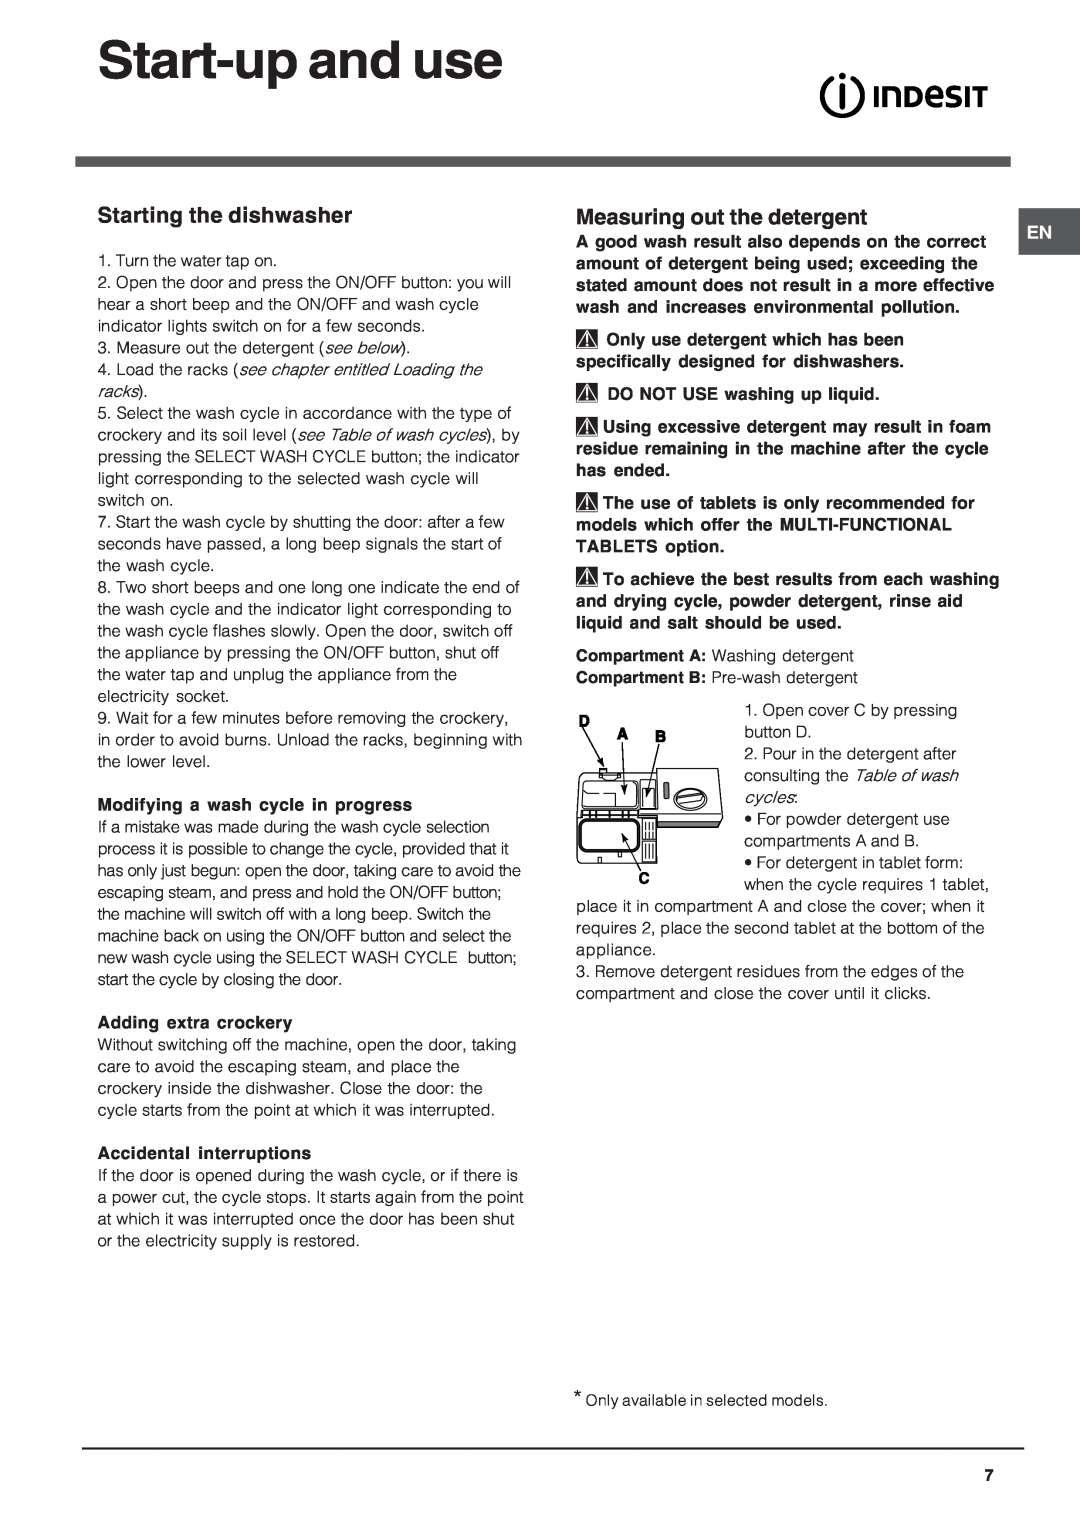 Indesit DIS 04 operating instructions Start-up and use, Starting the dishwasher, Measuring out the detergent 